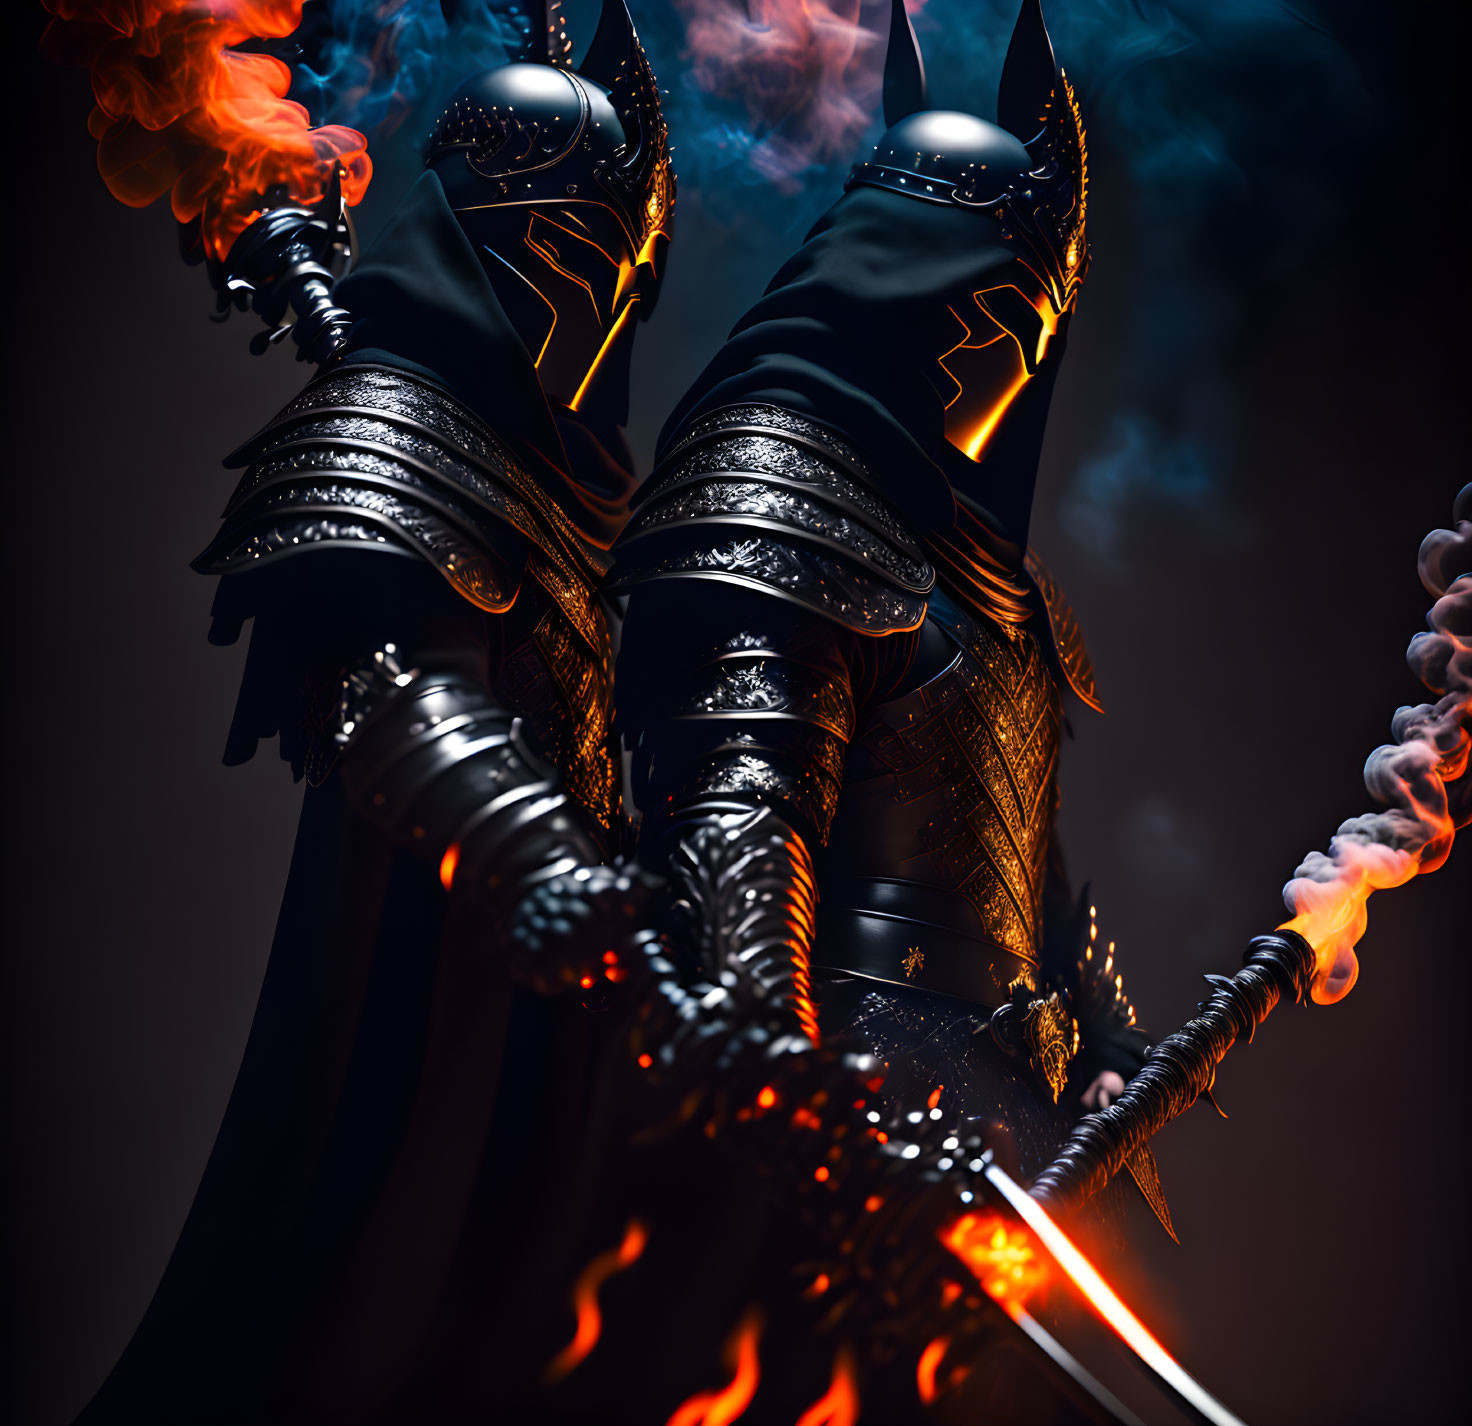 Dark-armored figure with glowing accents wields sword in blue smoke.